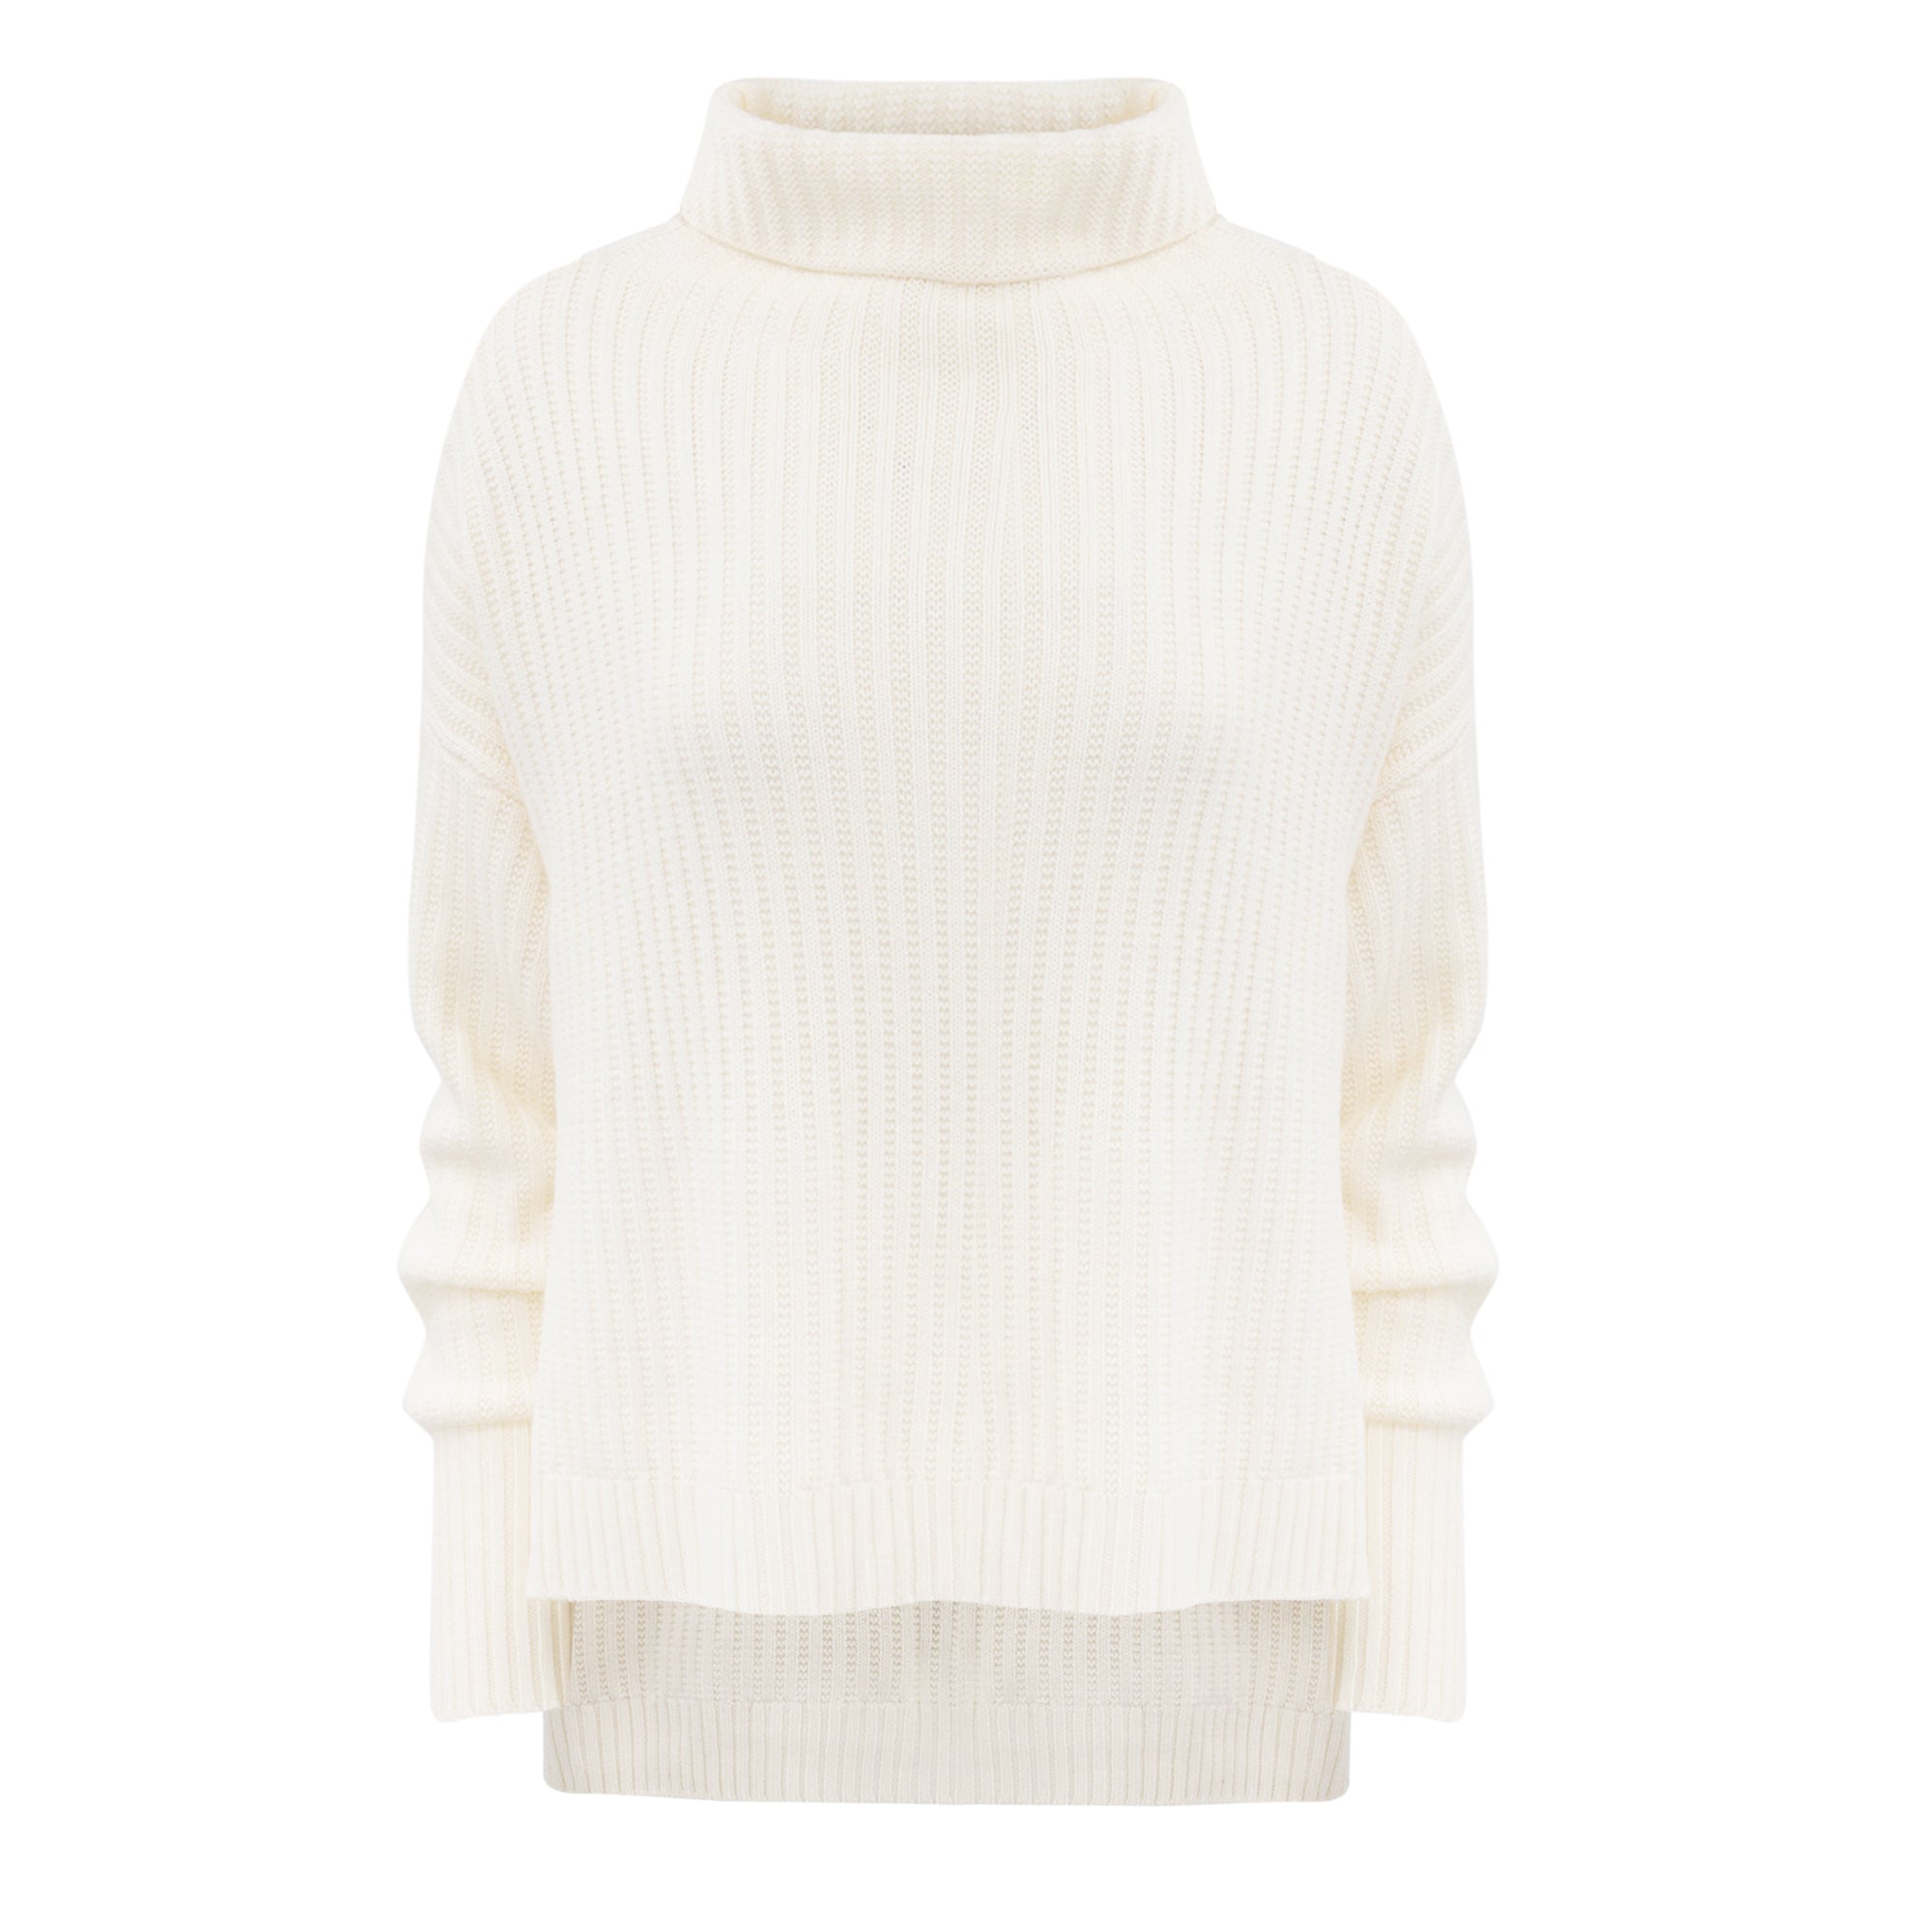 Everly Sweater - Ivory